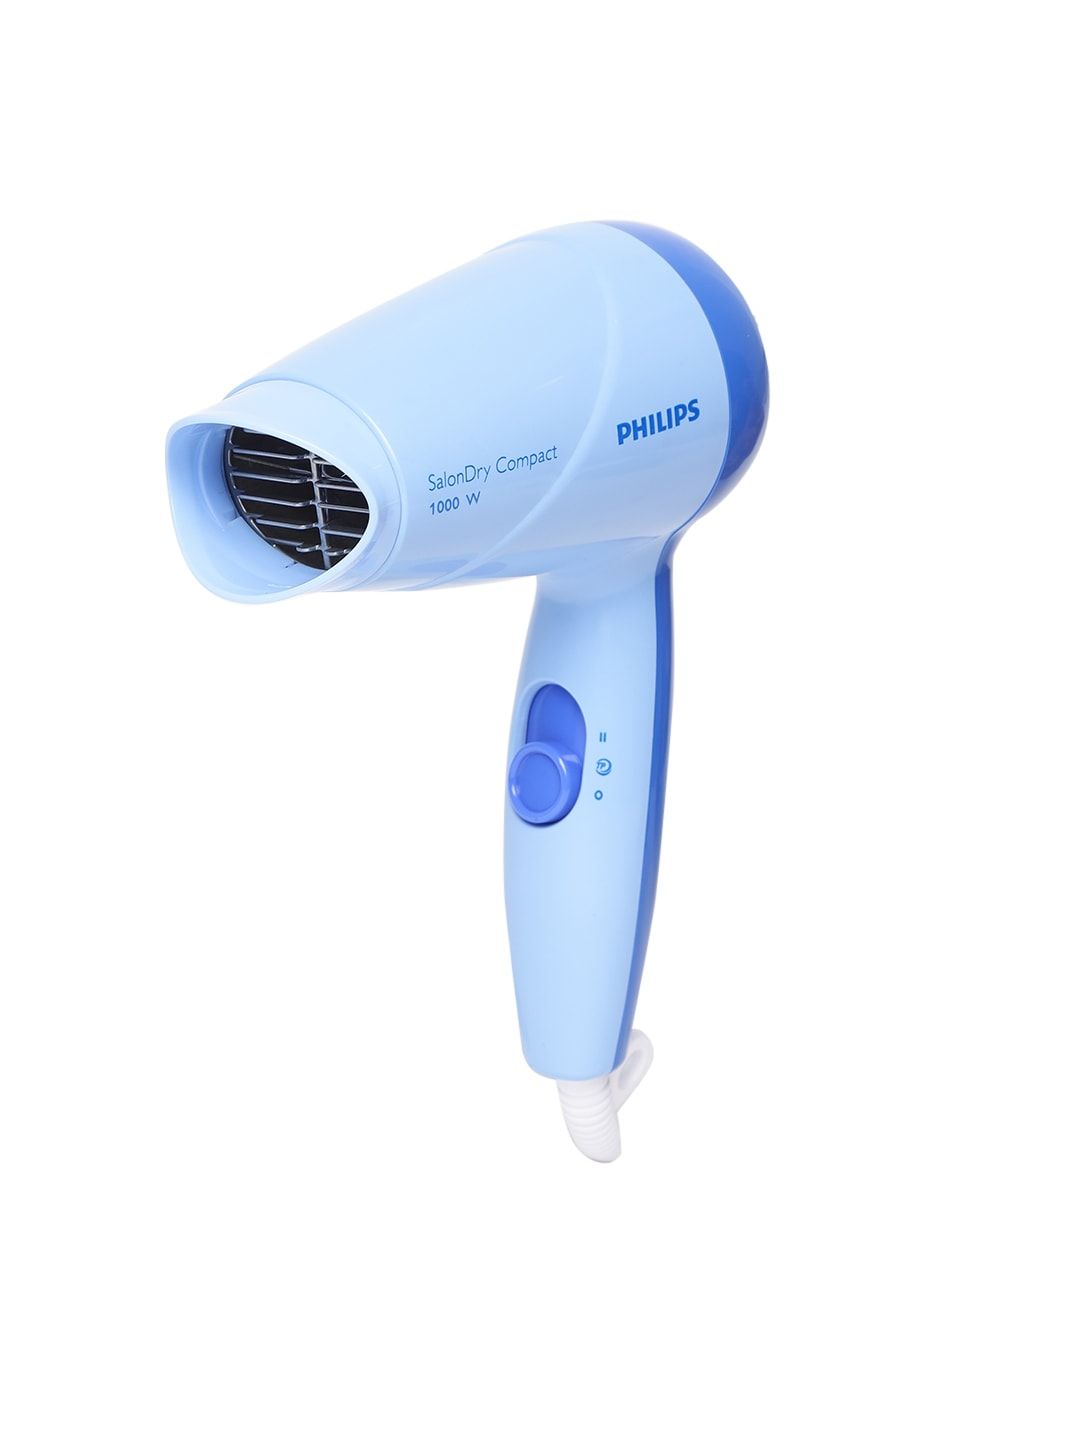 Philips HP8100/60 SalonDry ThermoProtect 1000W Compact Hair Dryer – Blue